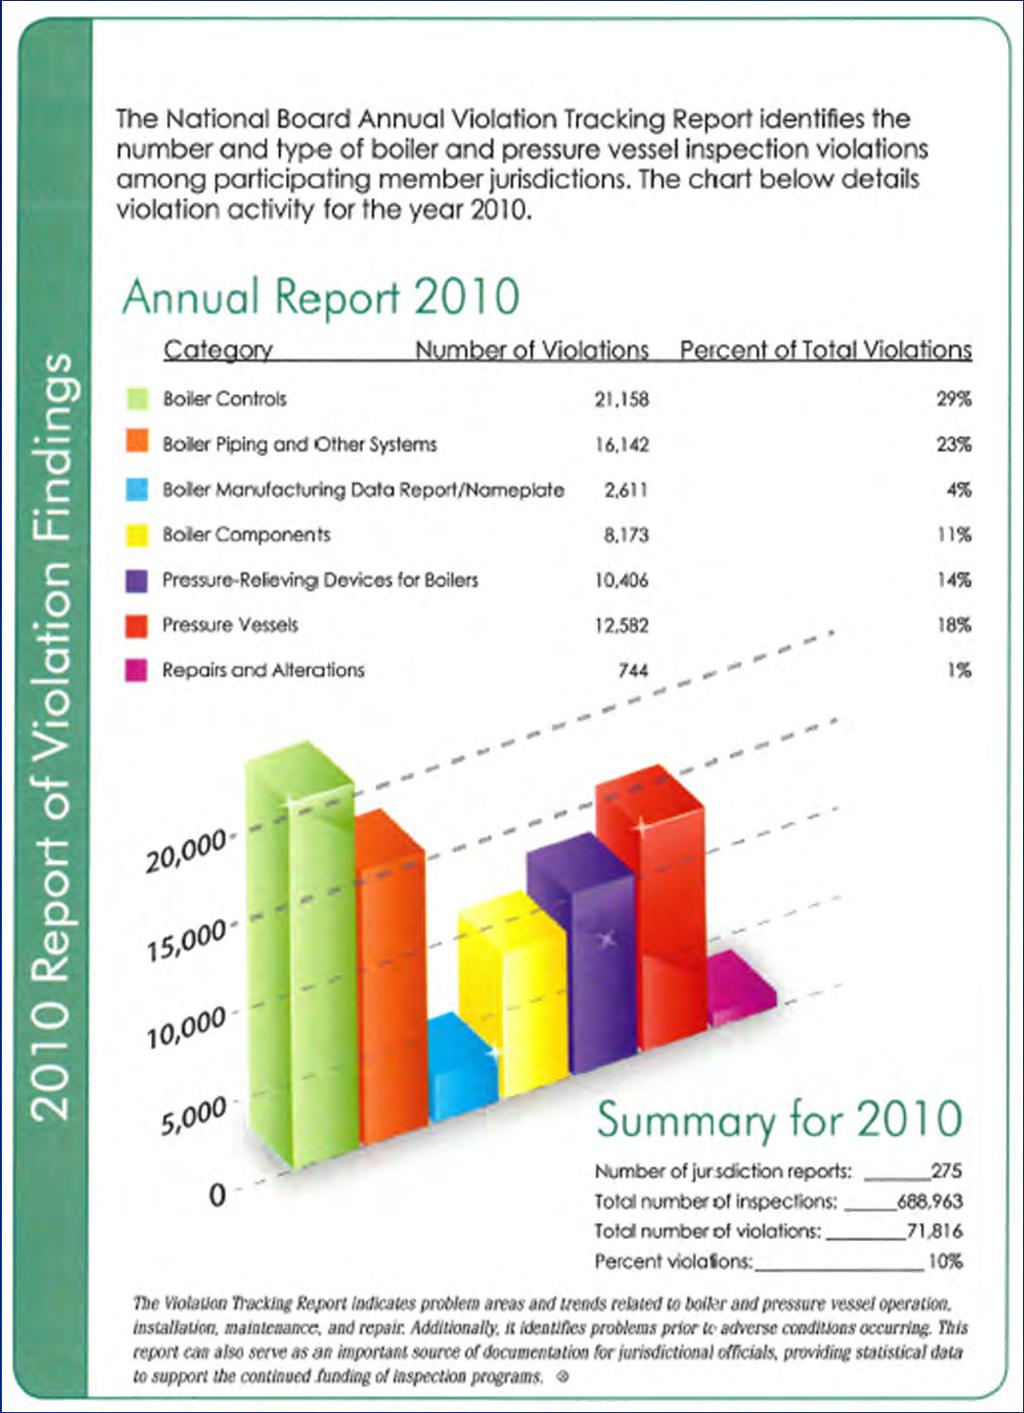 Annual Violation Report The data Illustrates Boiler Controls as the primary